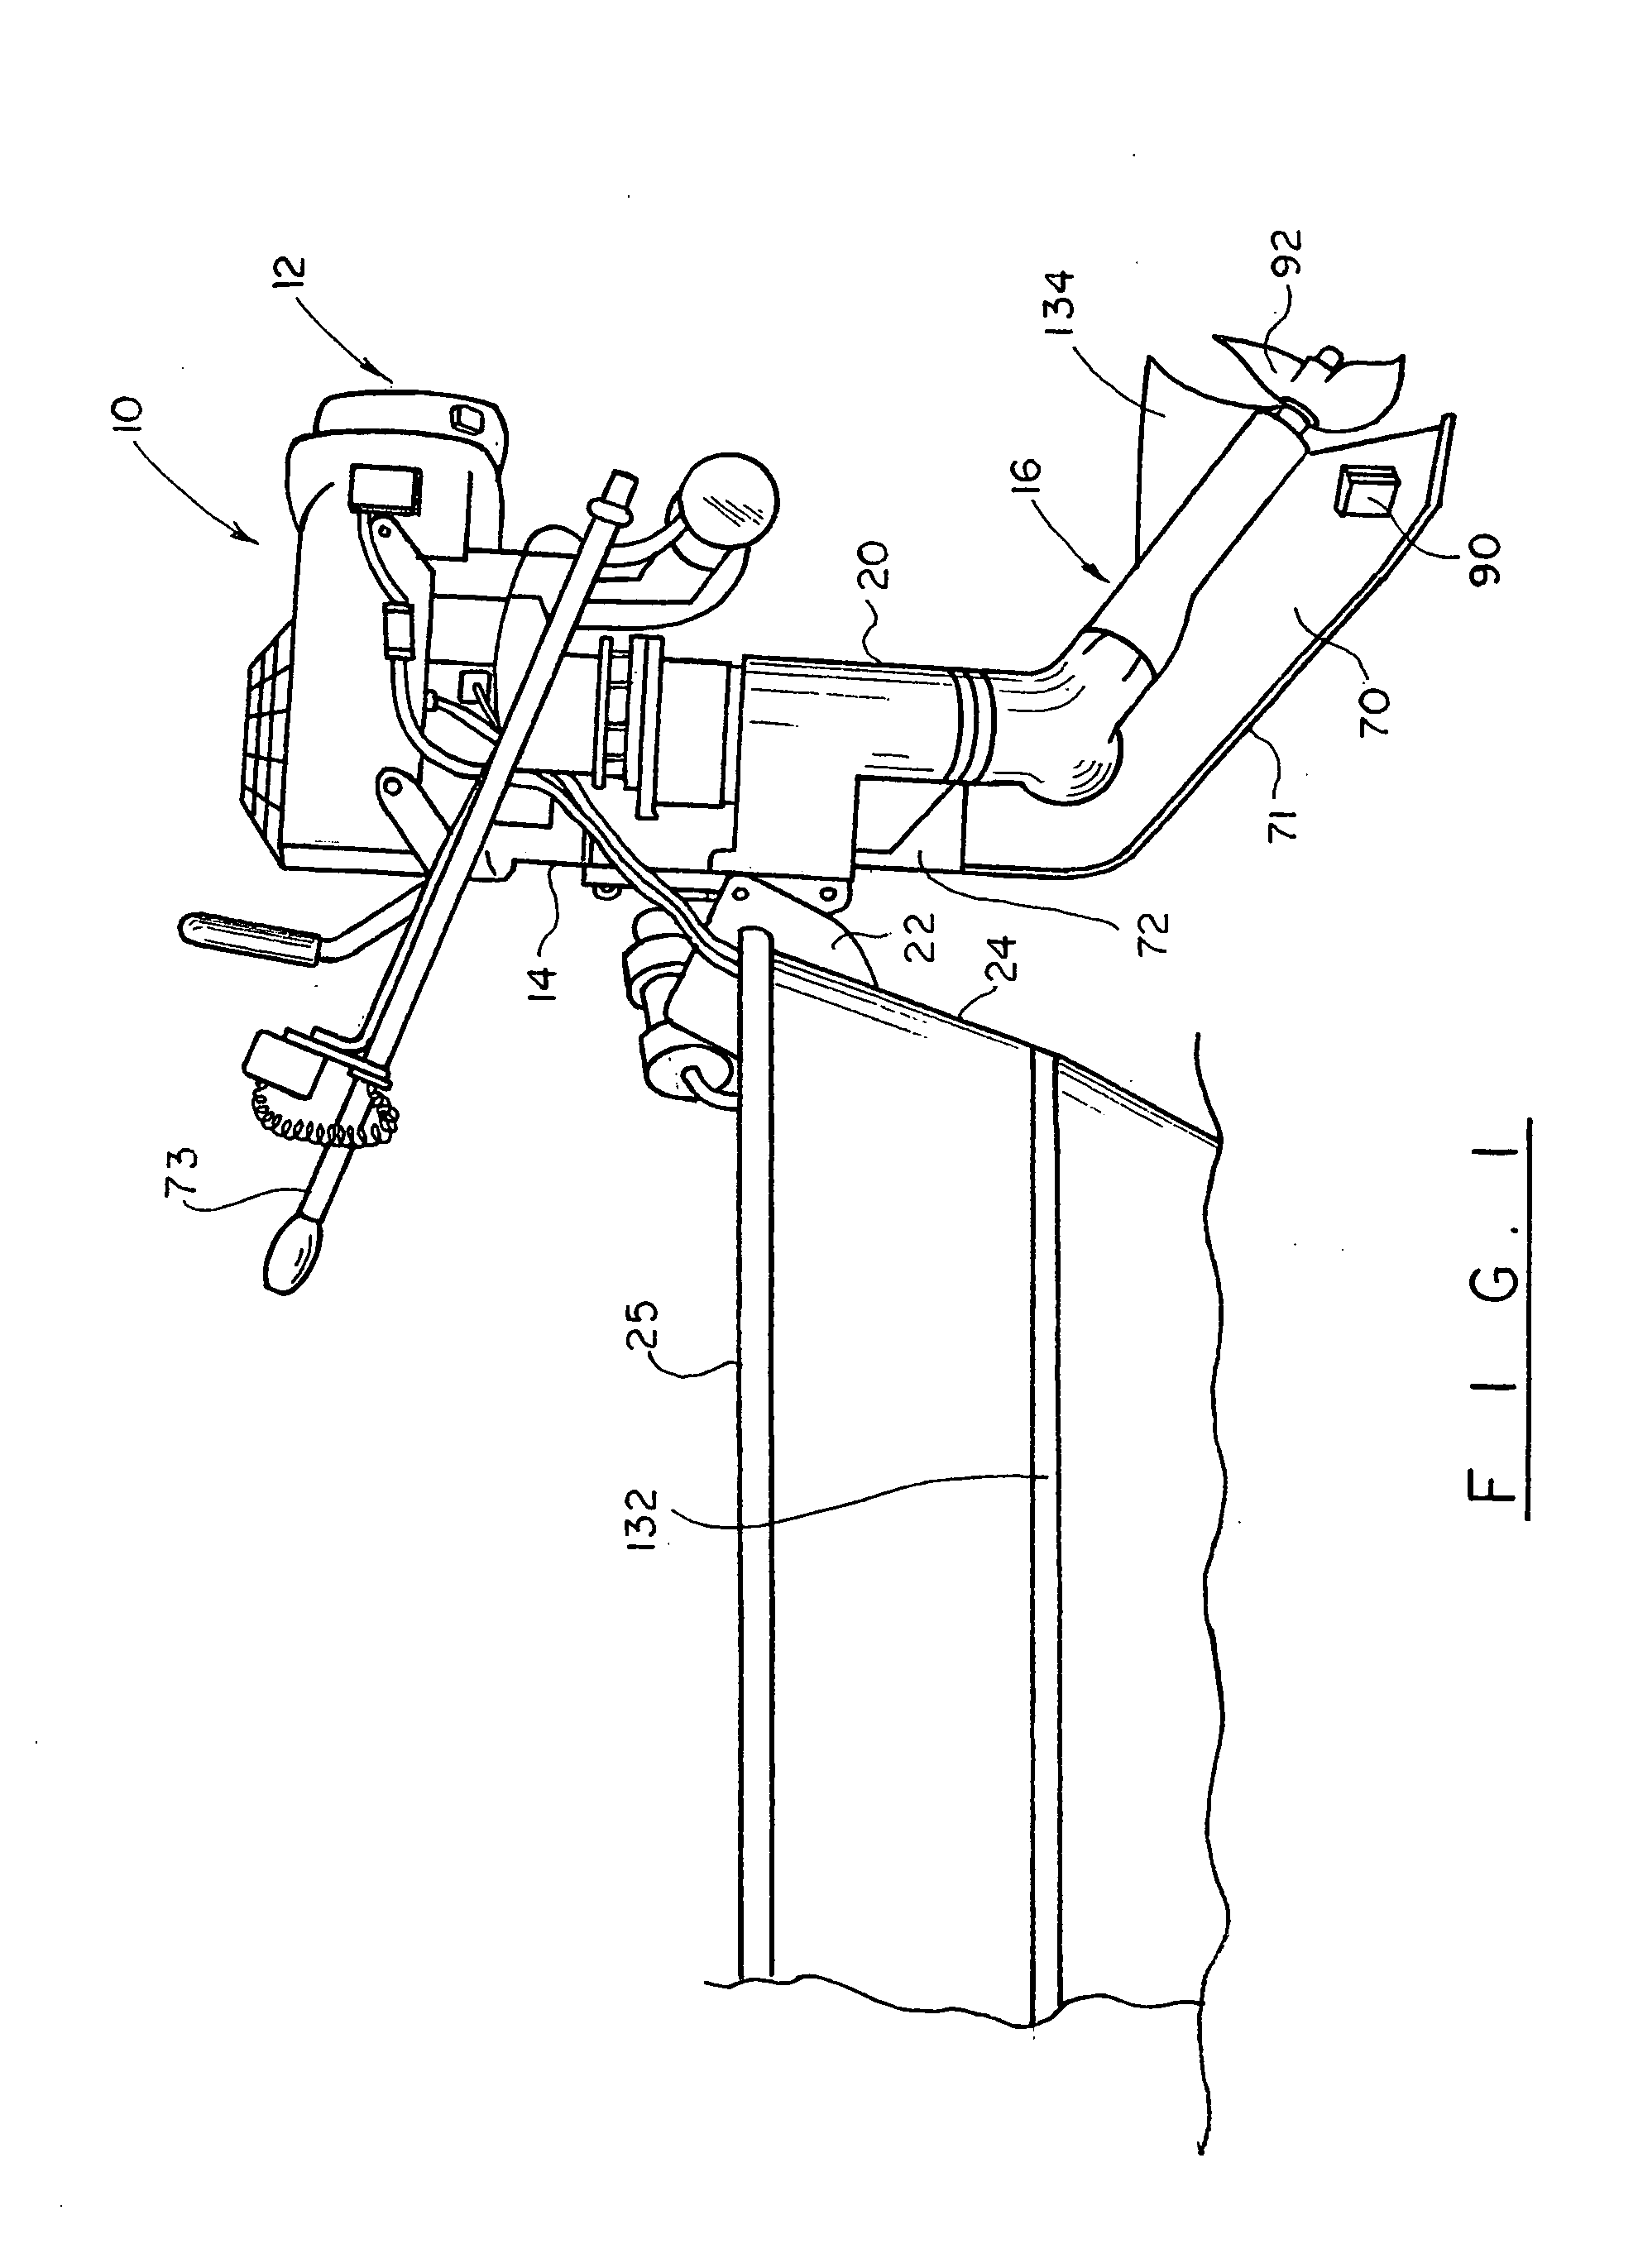 Outboard motor with reverse shift